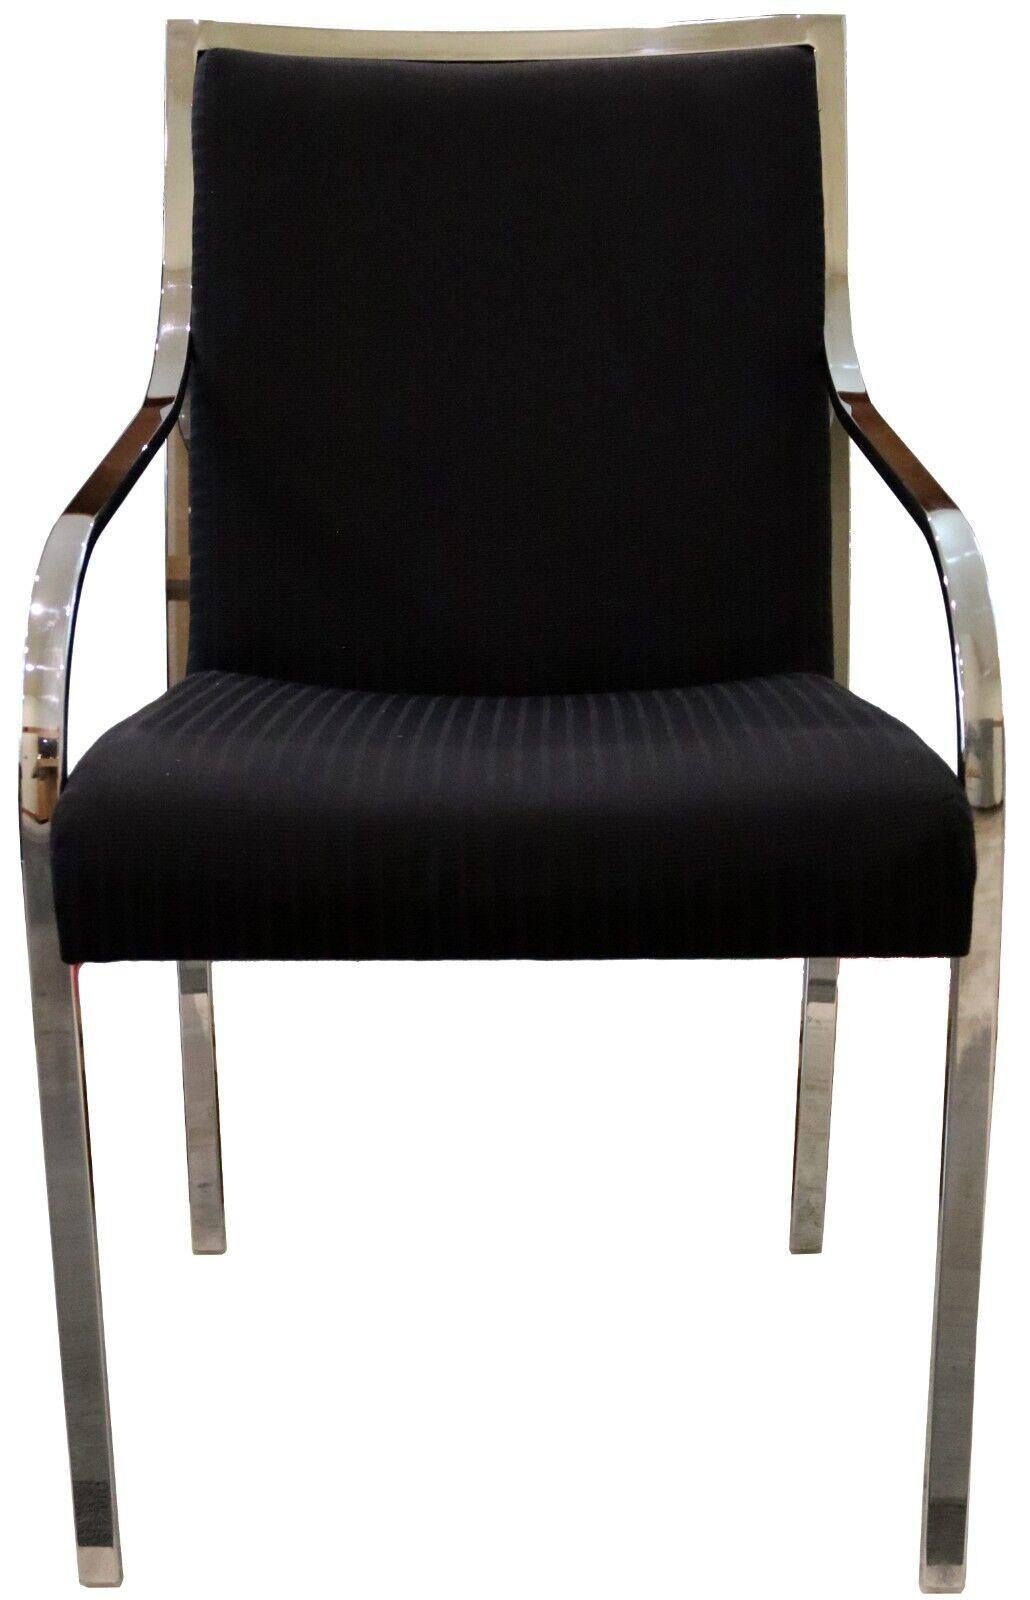 For your consideration is a stupendous set of ten, chrome and black fabric dining chairs, two with arms and eight side, circa the 1970s. In excellent vintage condition. The dimensions are 20